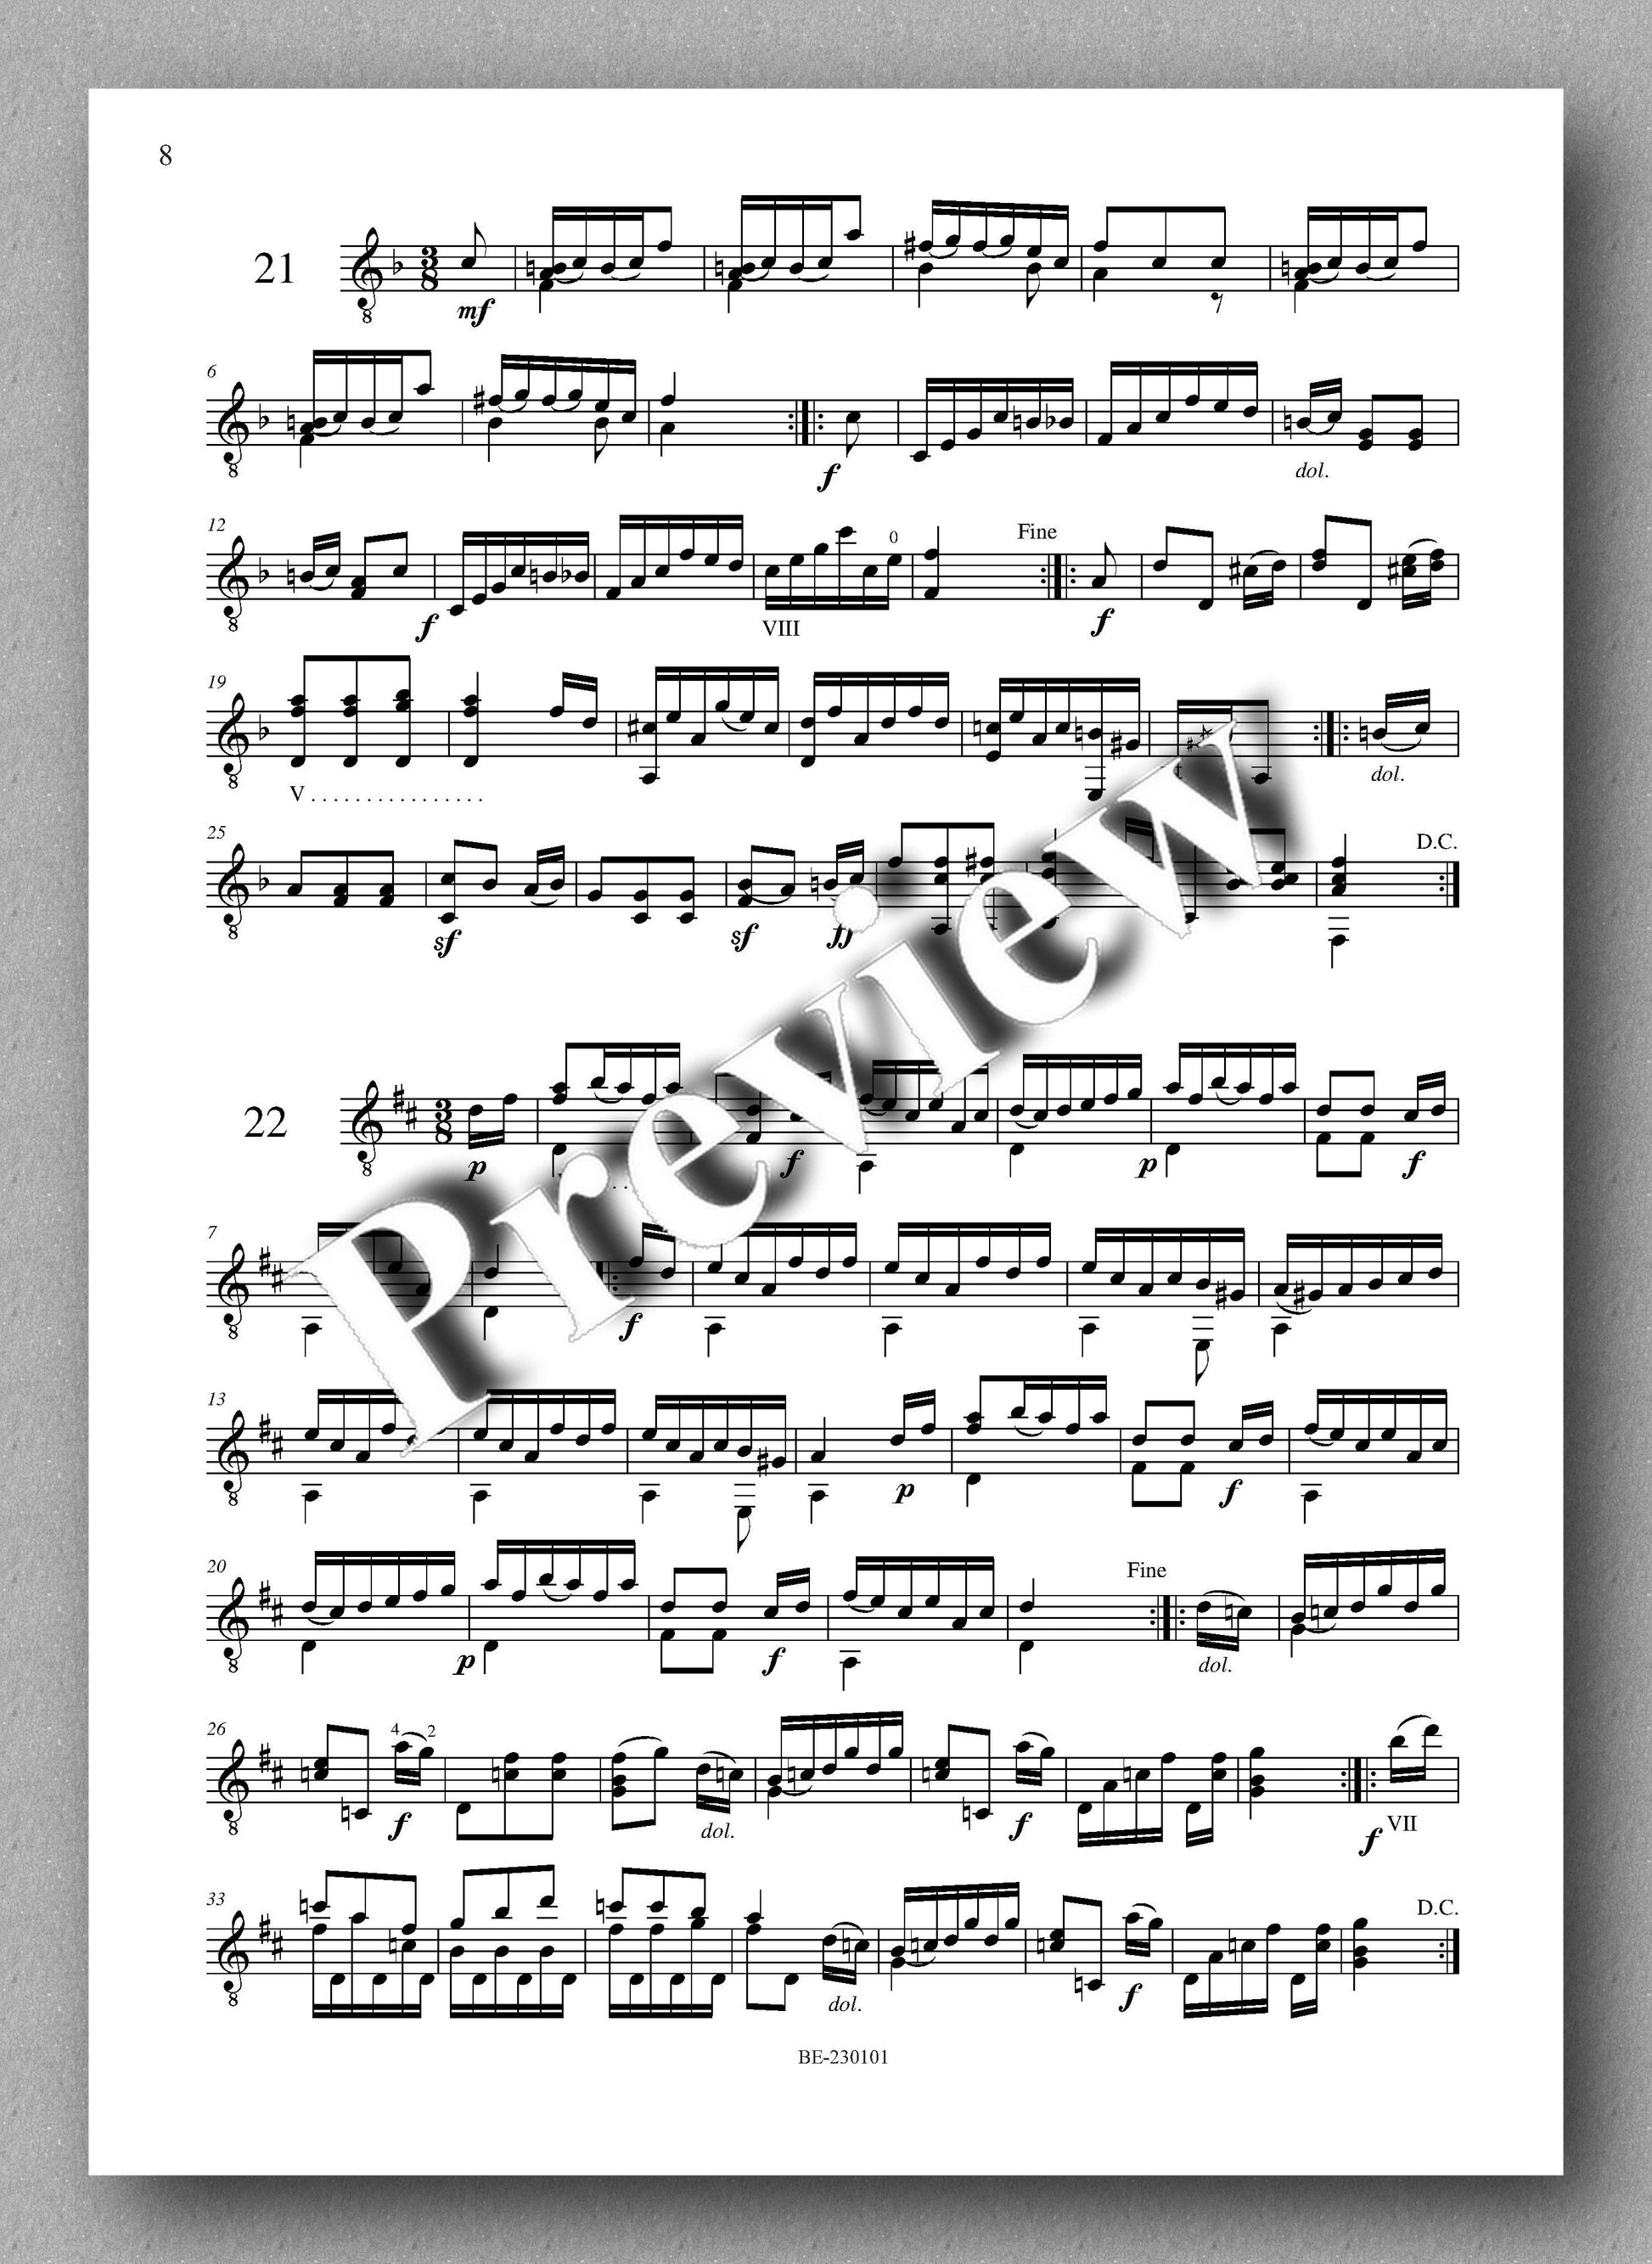 Molino, Collected Works for Guitar Solo, Vol. 13 - preview of the music score 2